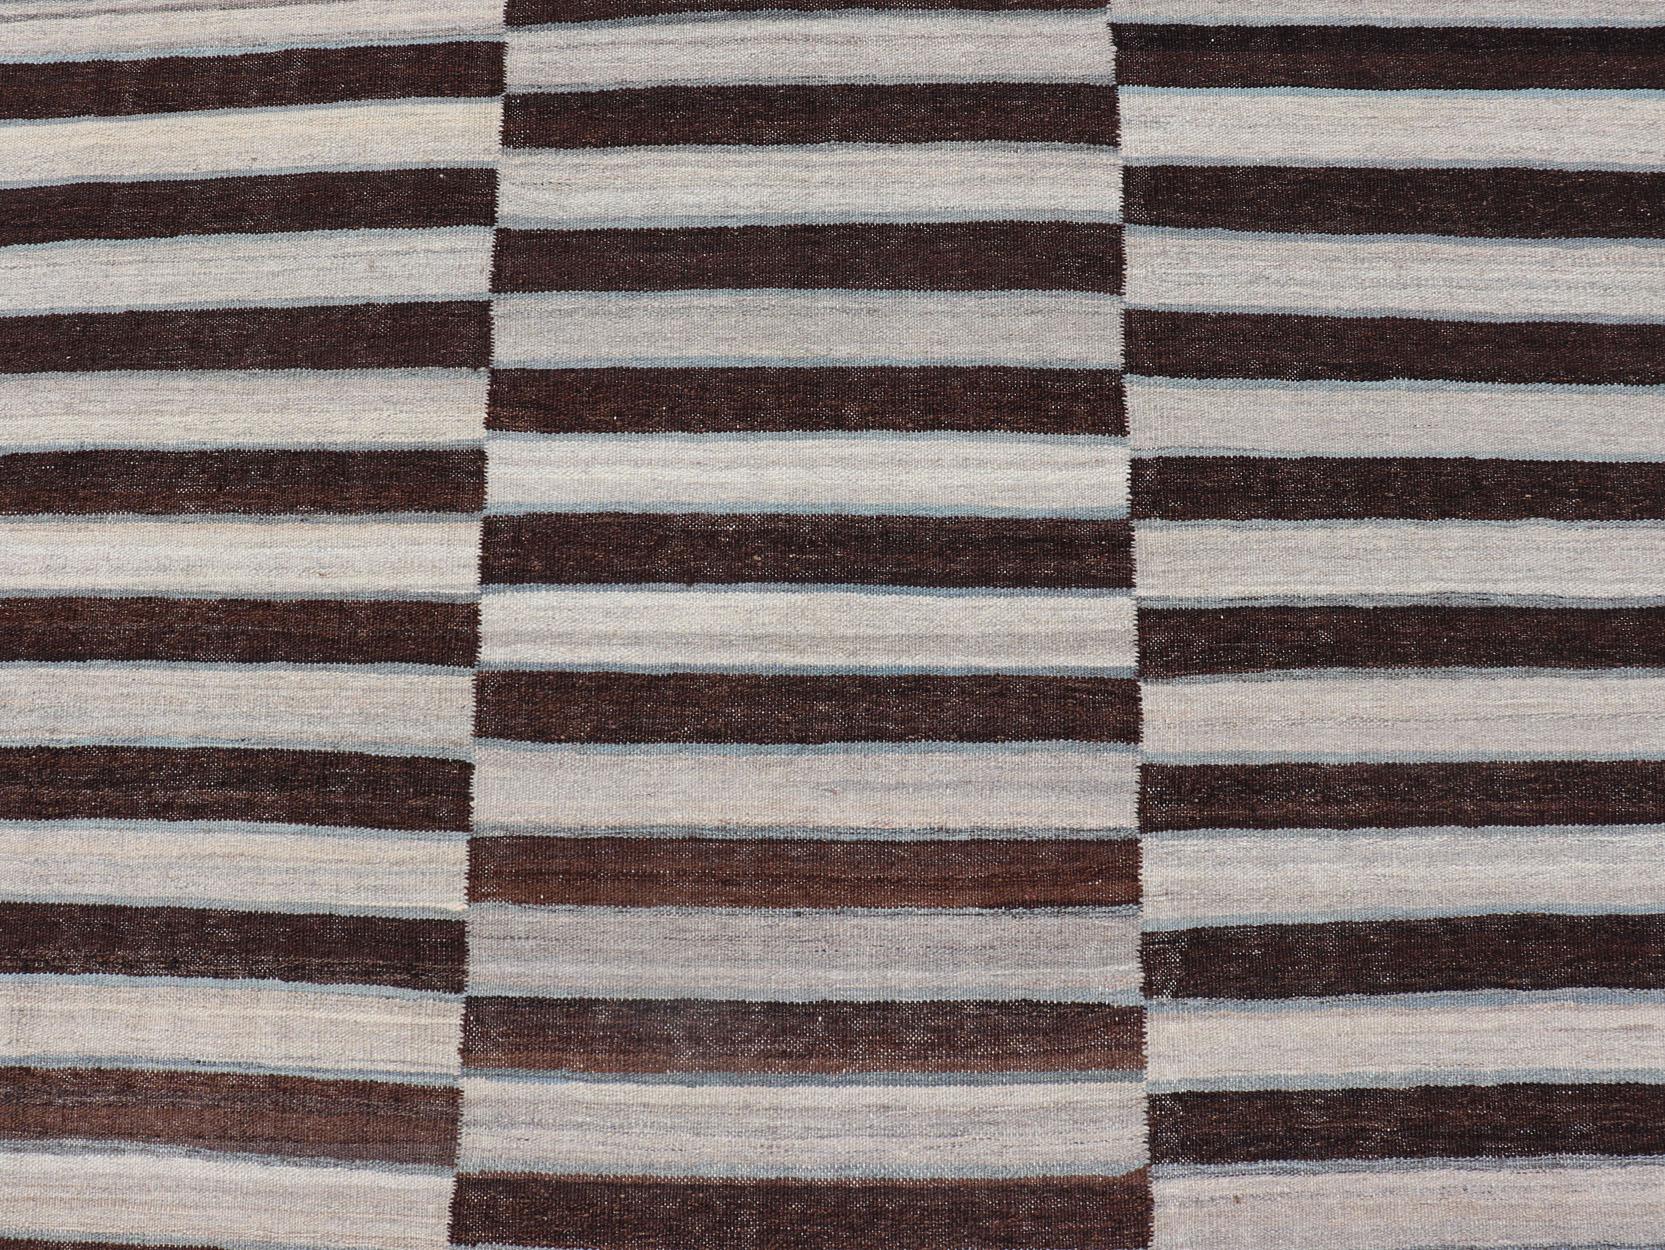 Modern Kilim Rug in Multi-Panel Striped Design with Chocolate Brown, cream  For Sale 1